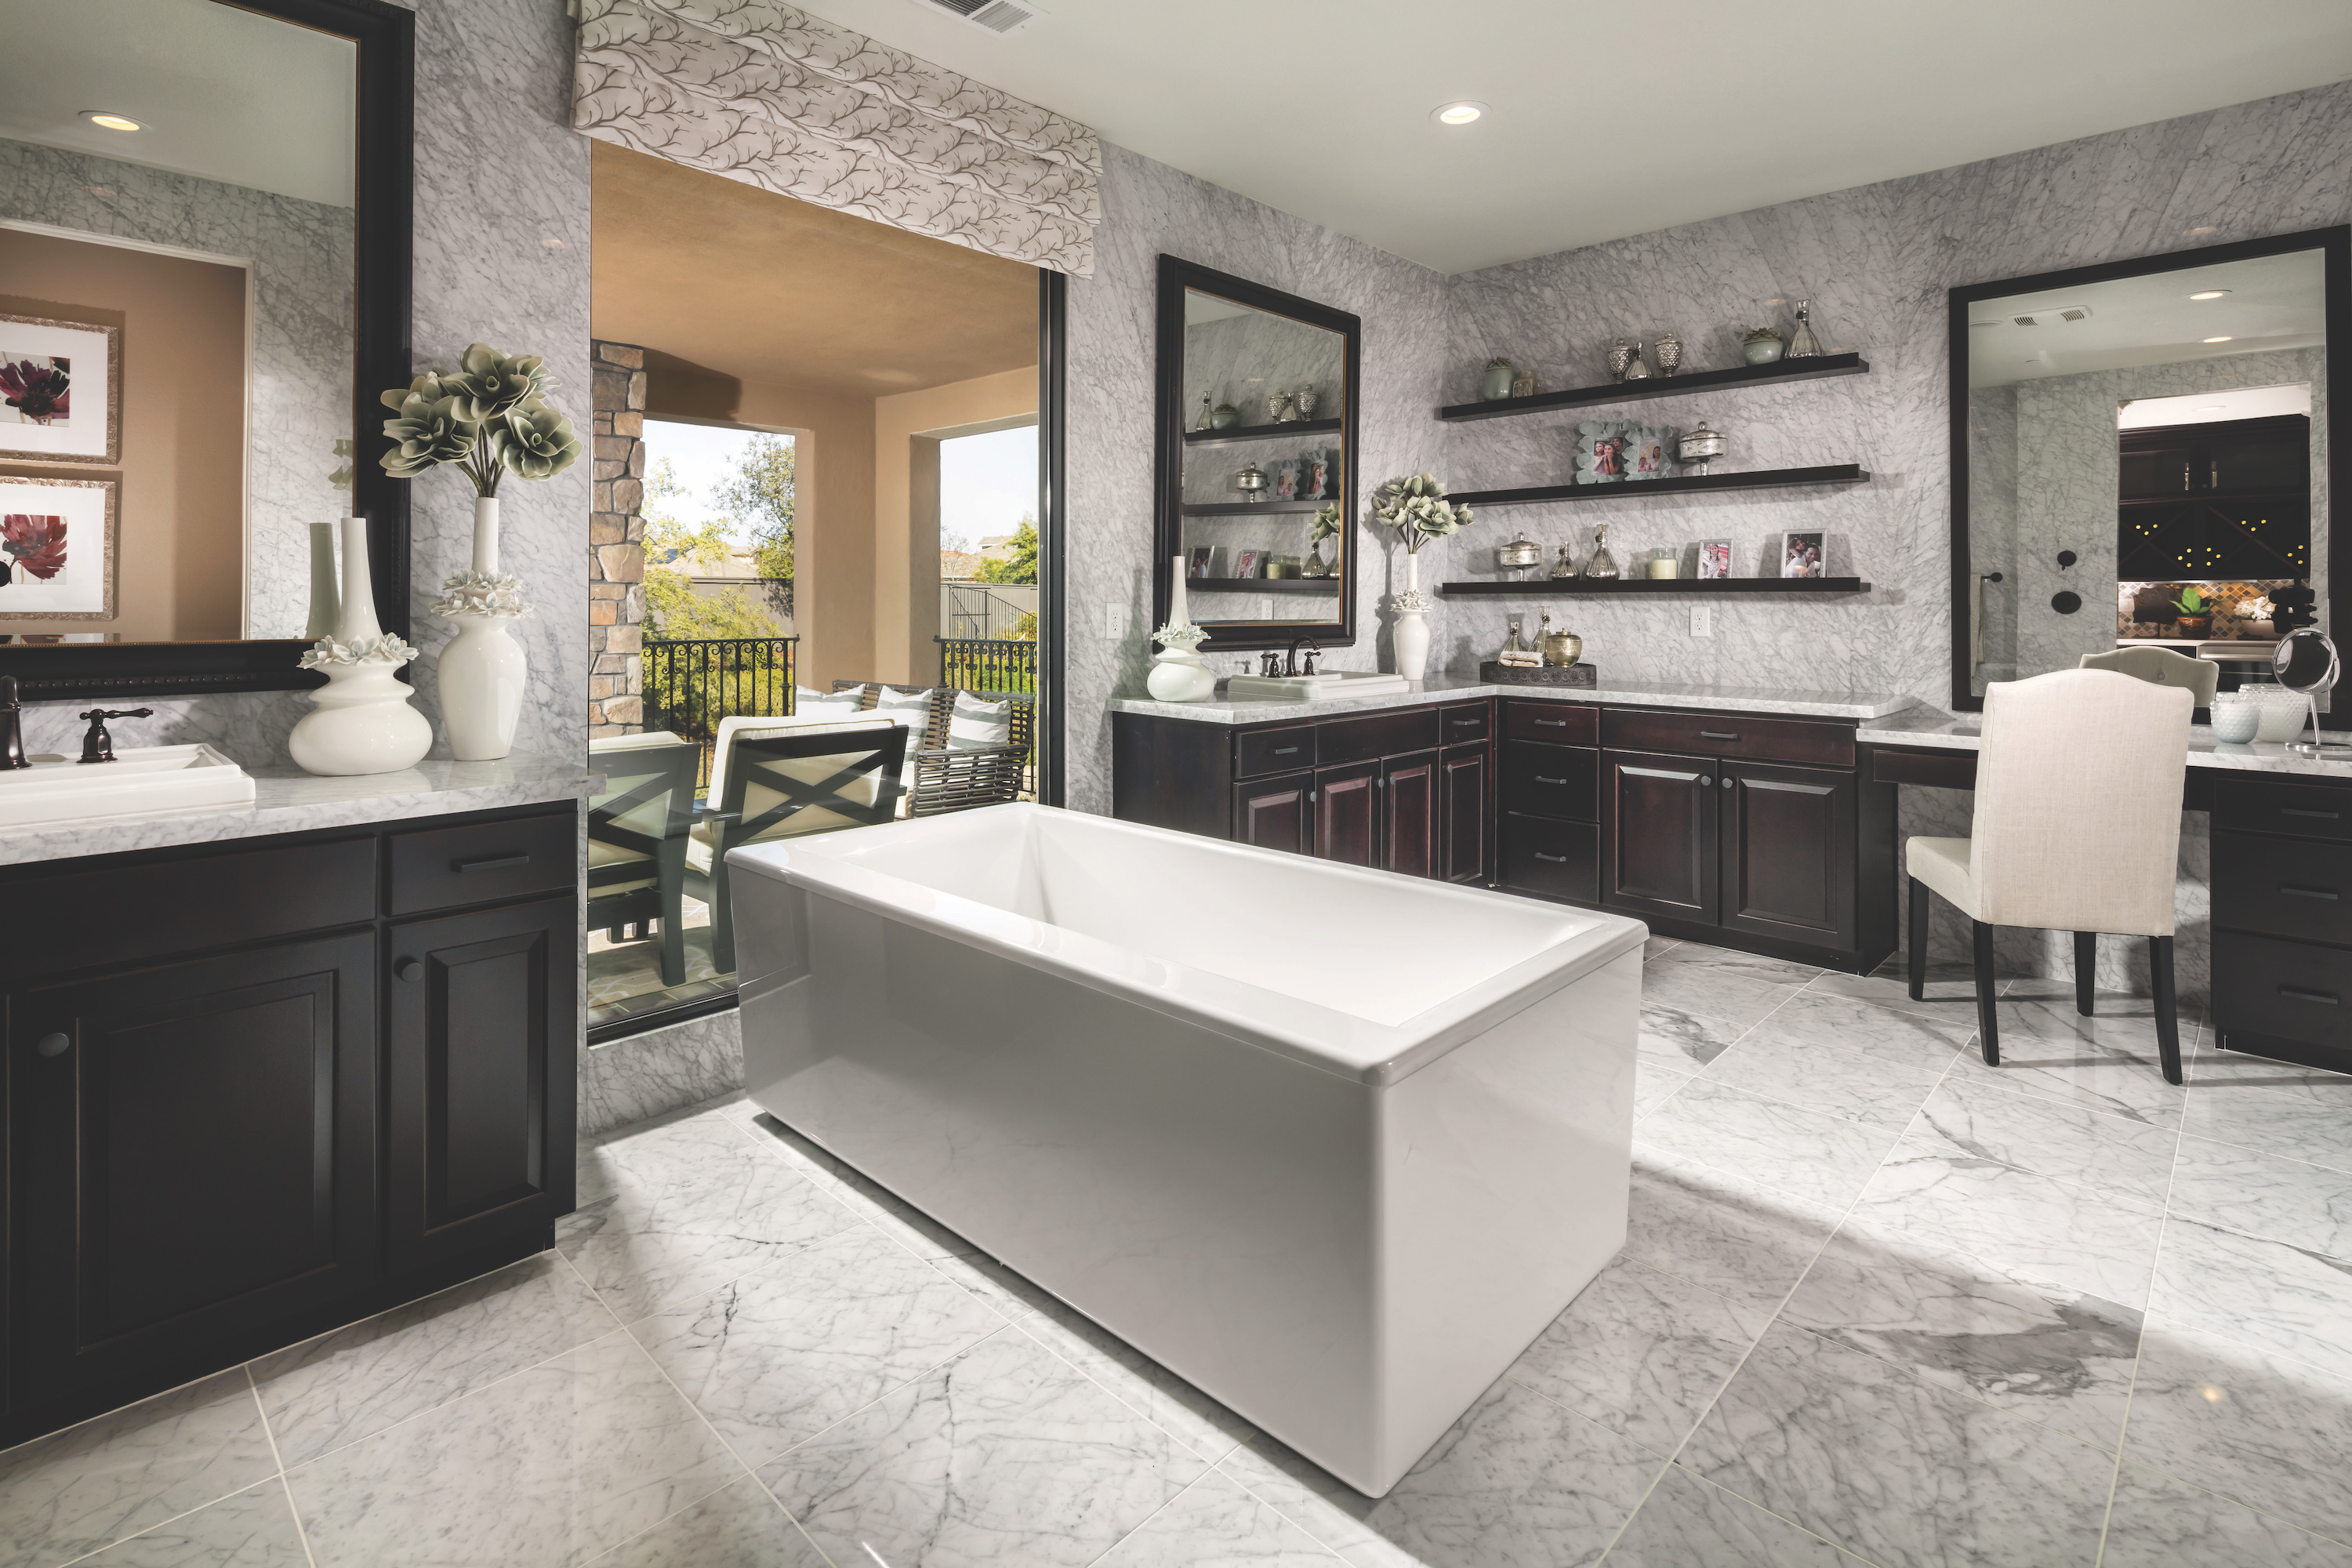 Marble bathroom with freestanding bathtub and bold black vanity cabinets.